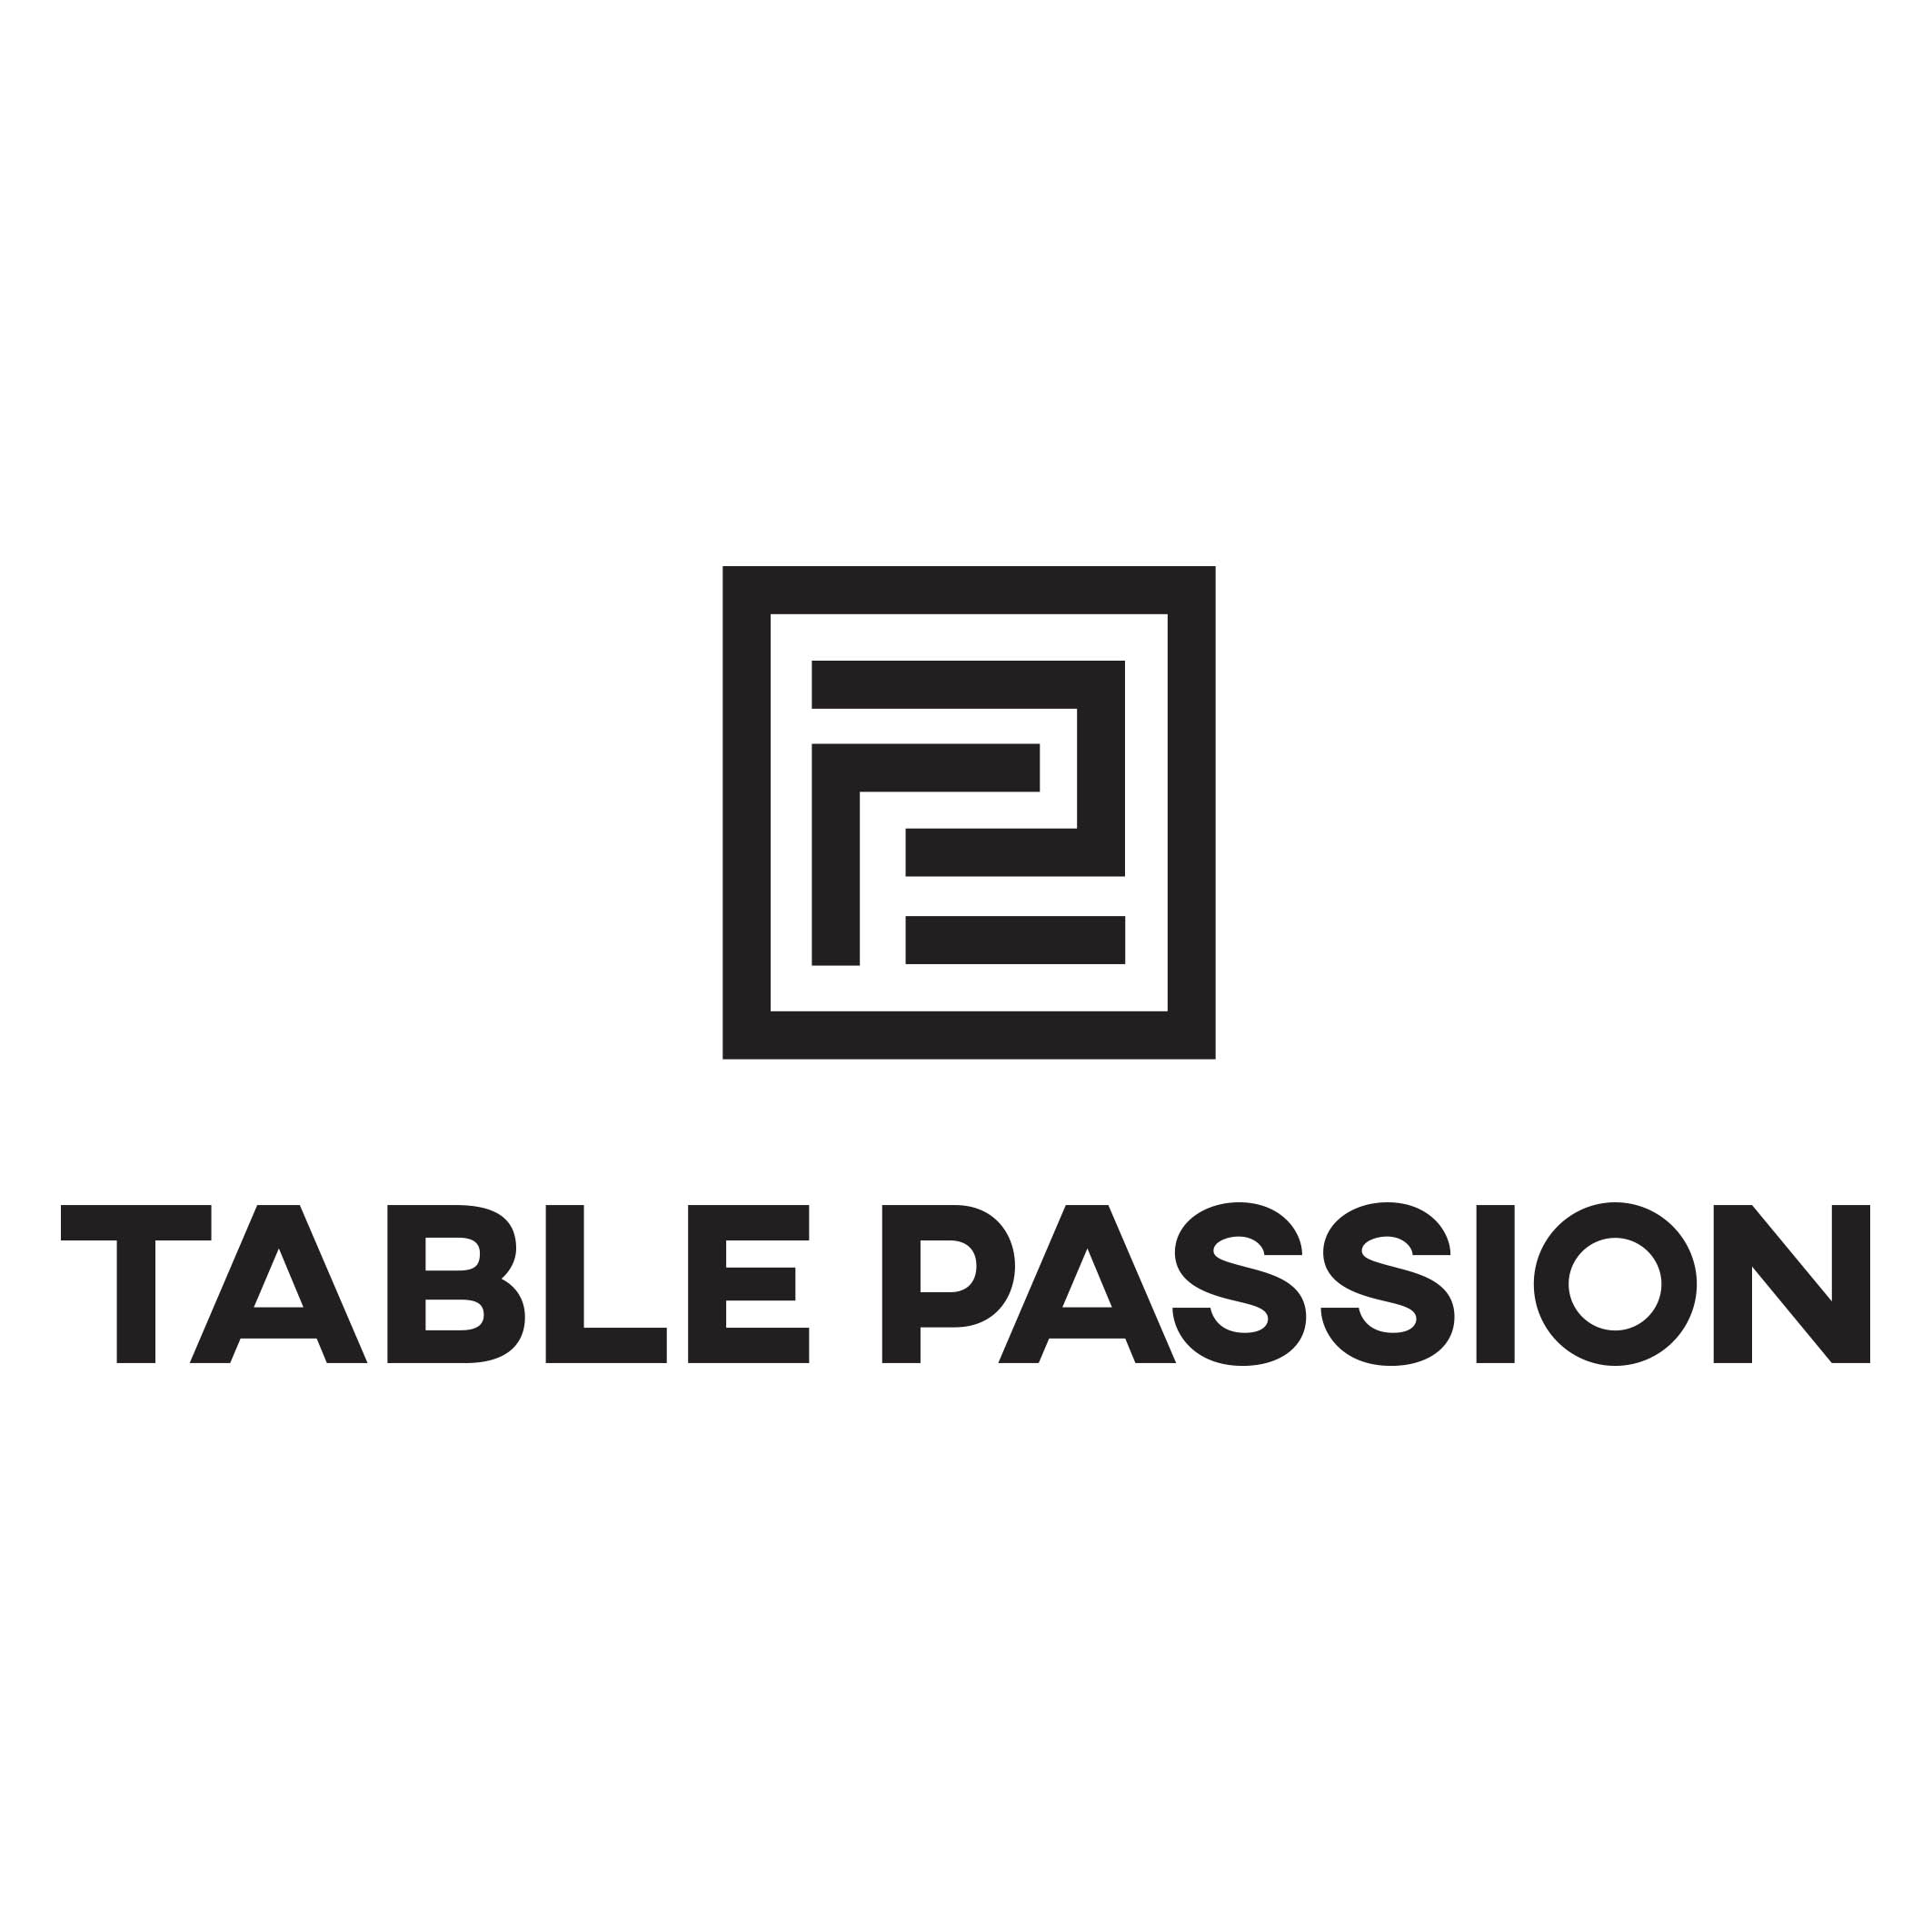 TABLE-PASSION.jpg